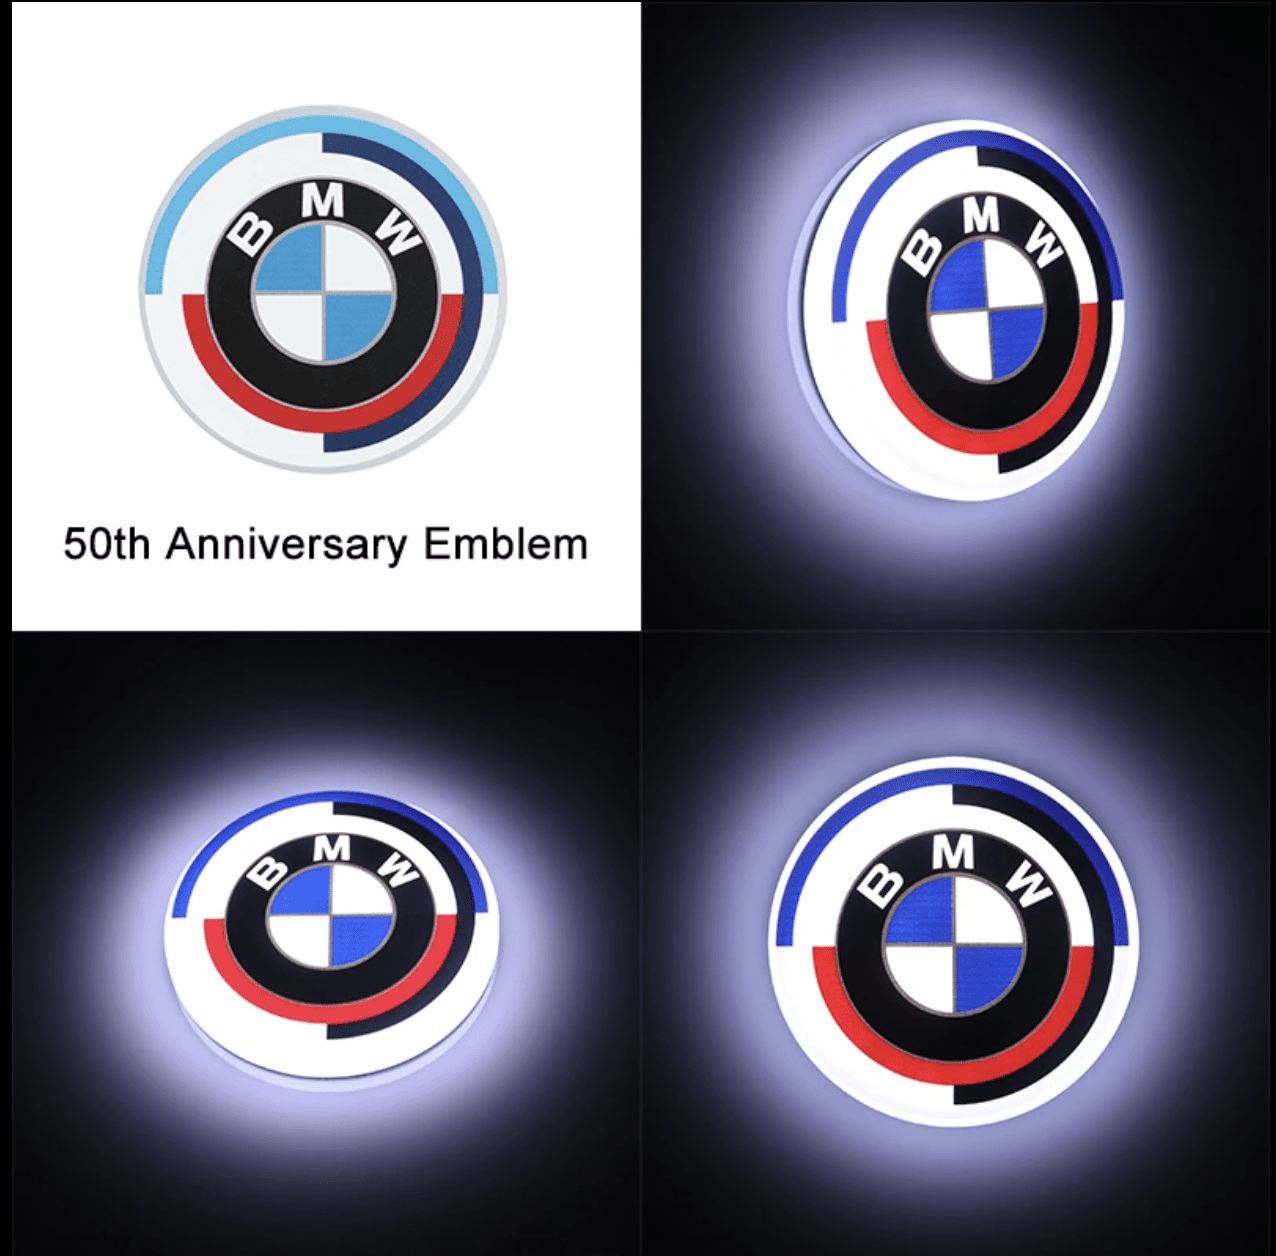 BMW M to turn 50 with revival of historic logo and colours